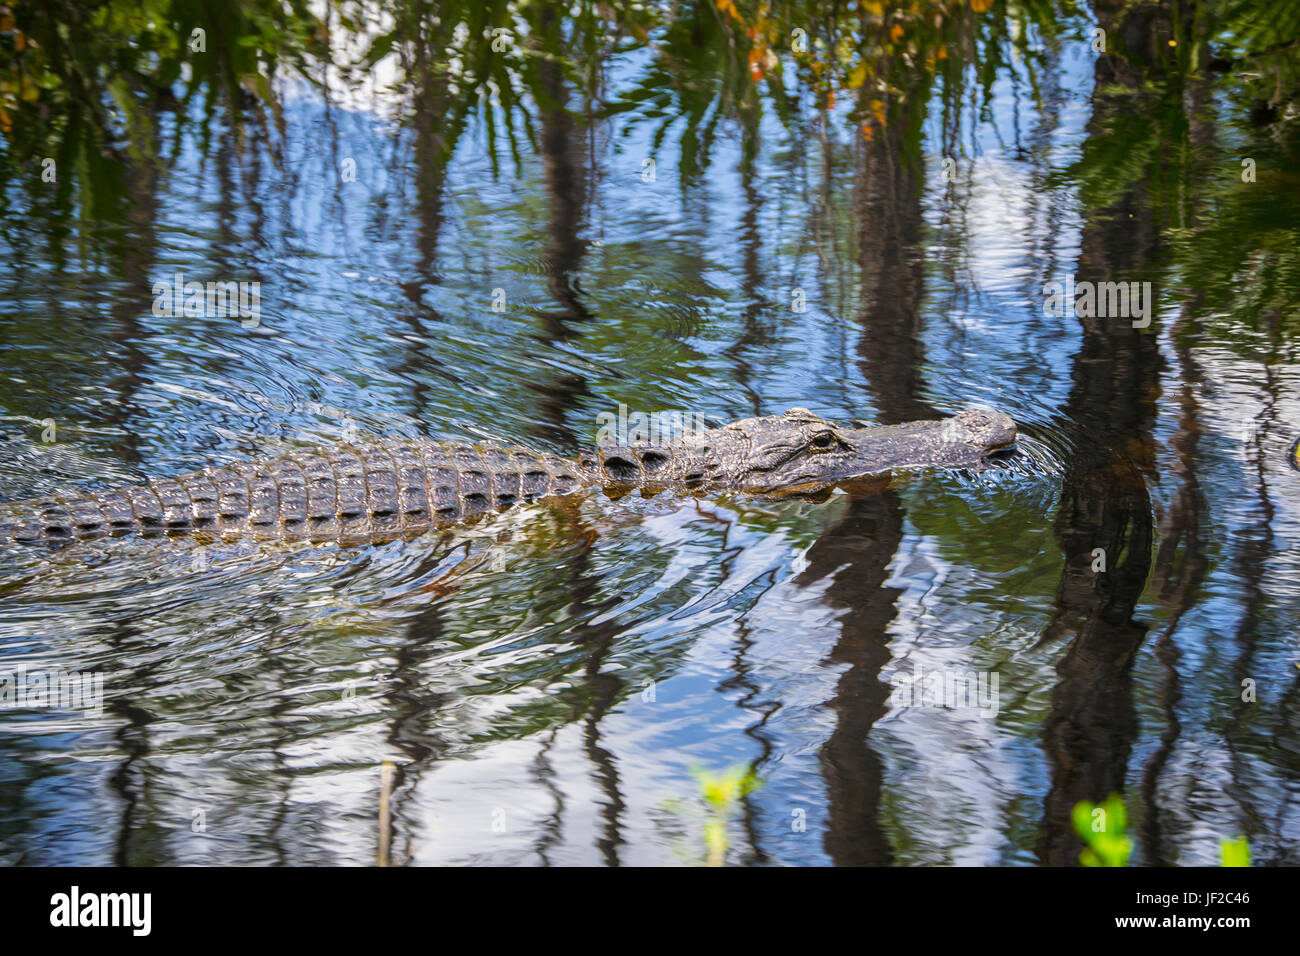 American Alligator swimming in the water in the Okefenokee Wildlife Refuge. Stock Photo